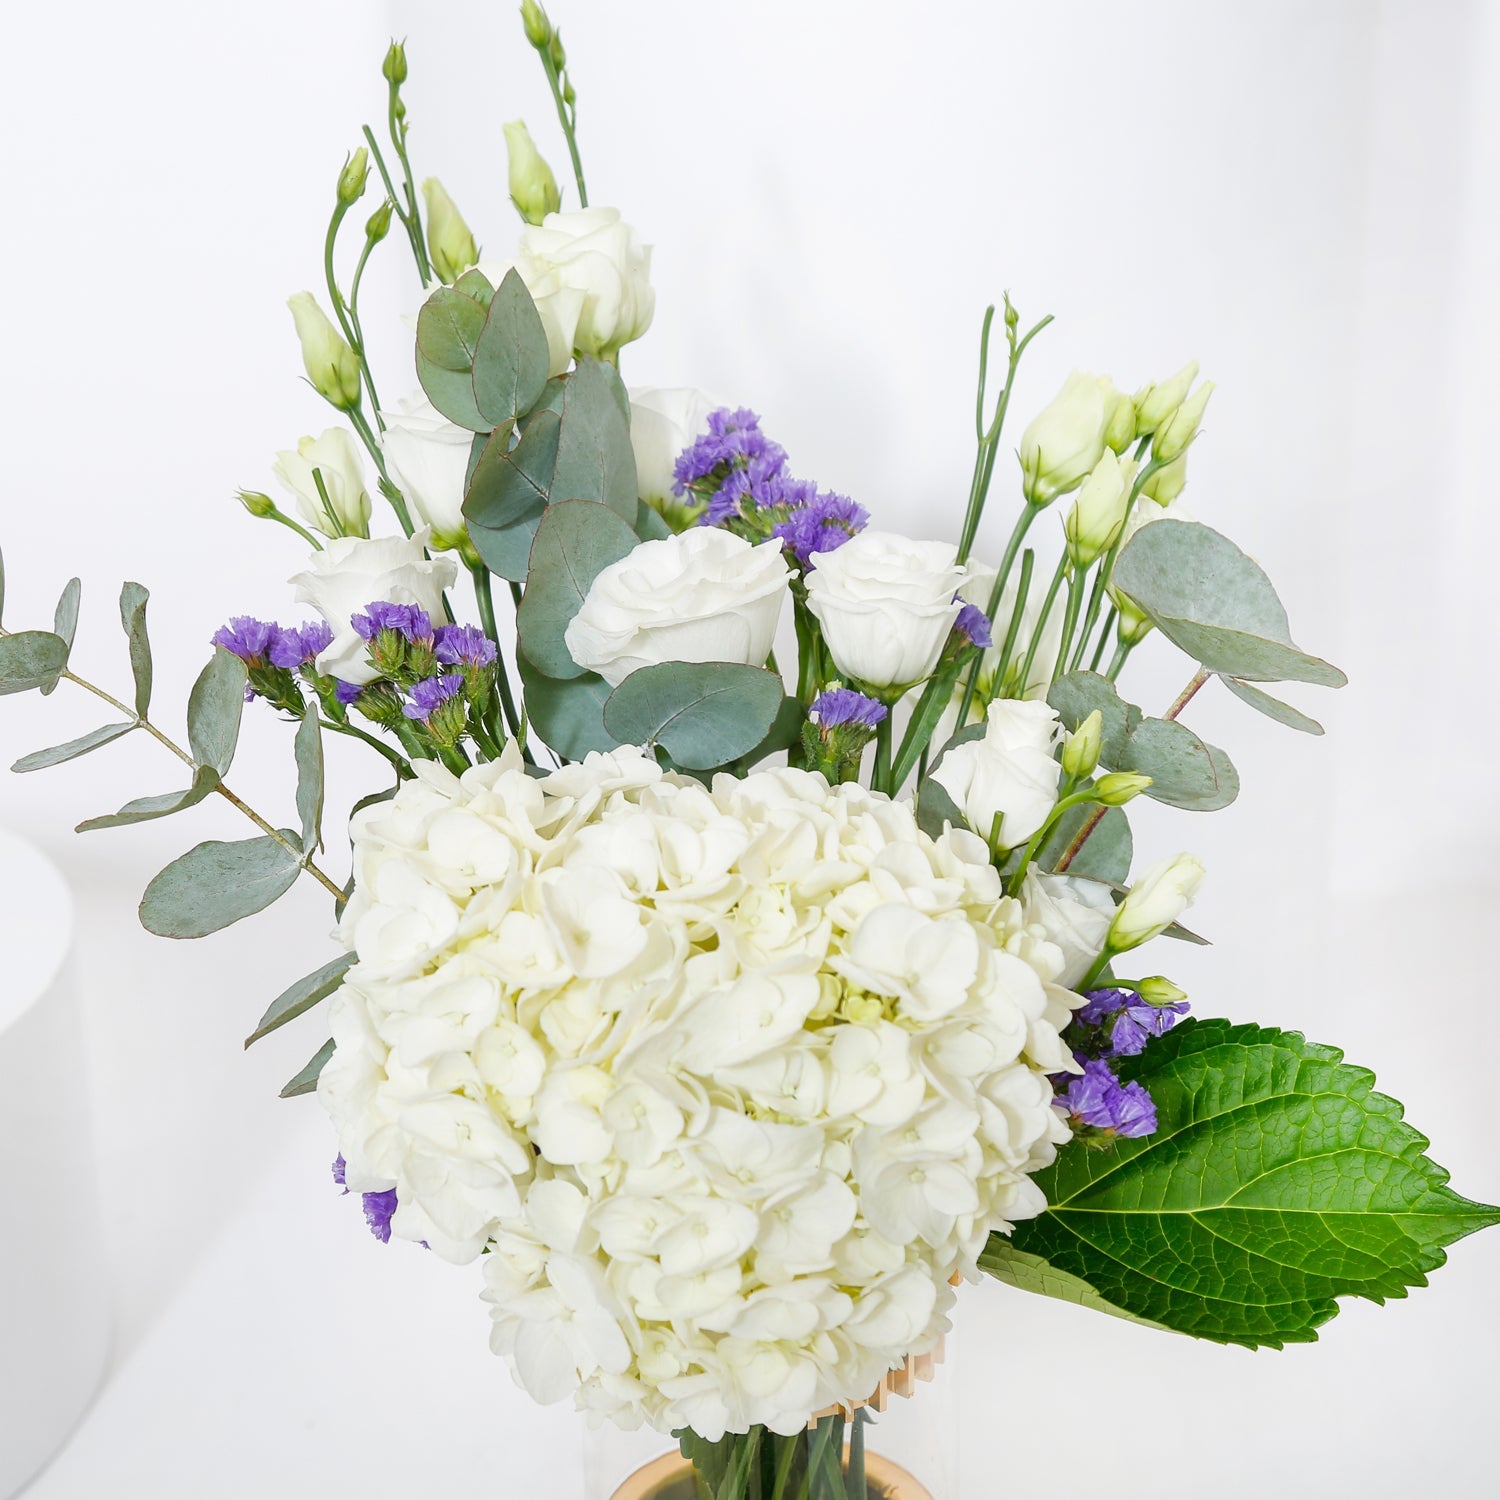 White Hydrangea with Umrah Topper